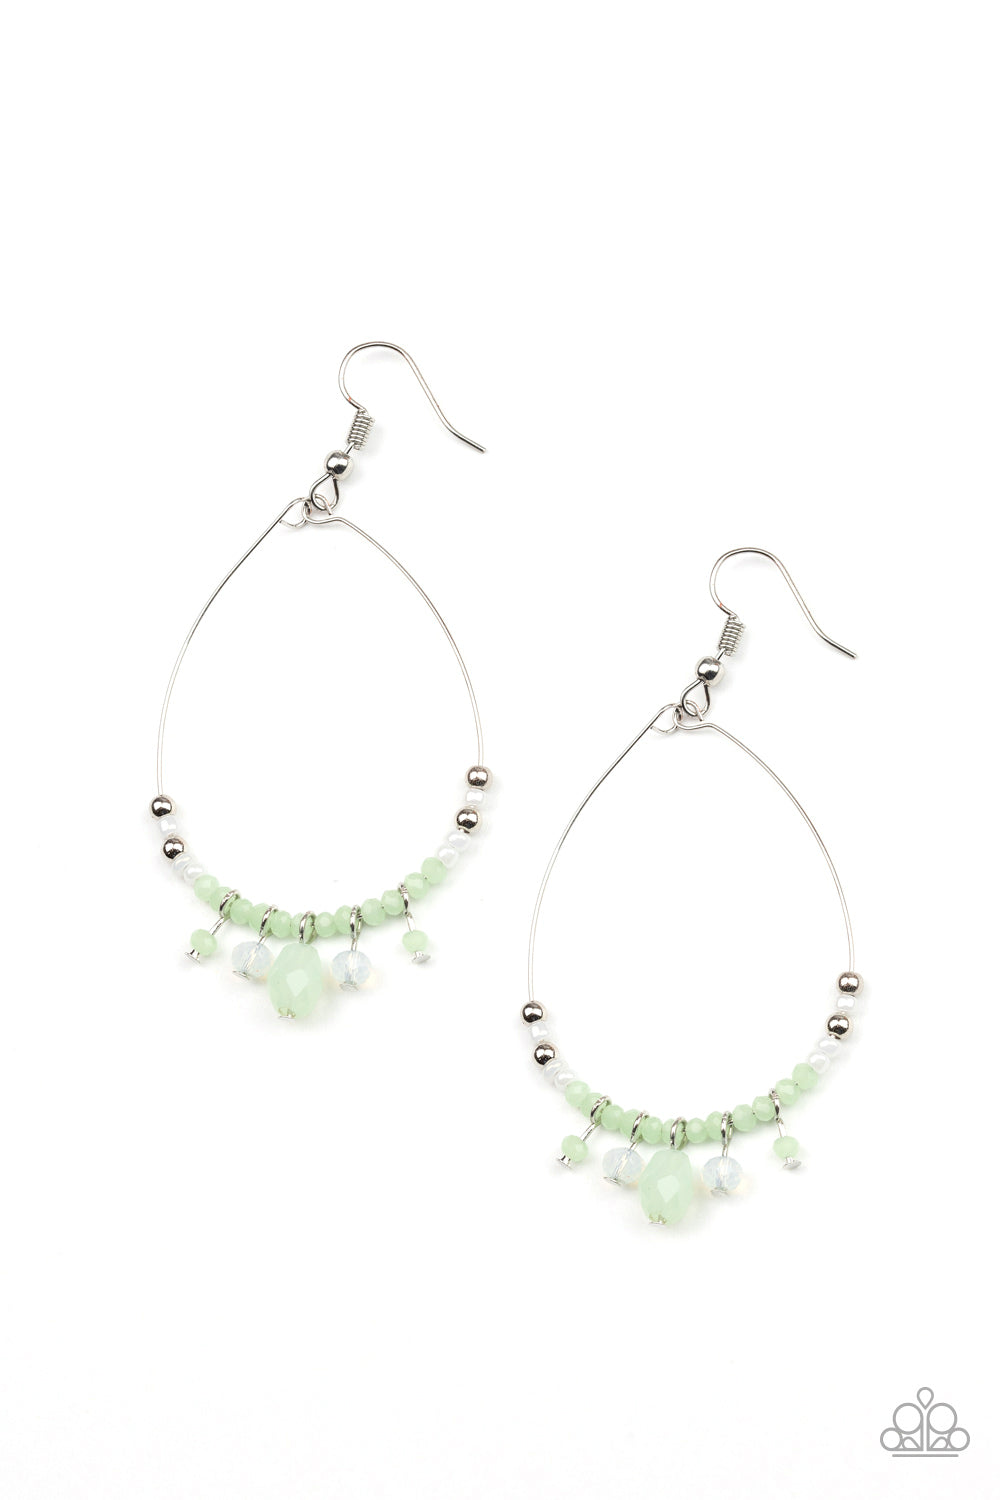 shop-sassy-affordable- exquisitely-ethereal-green-paparazzi-accessories